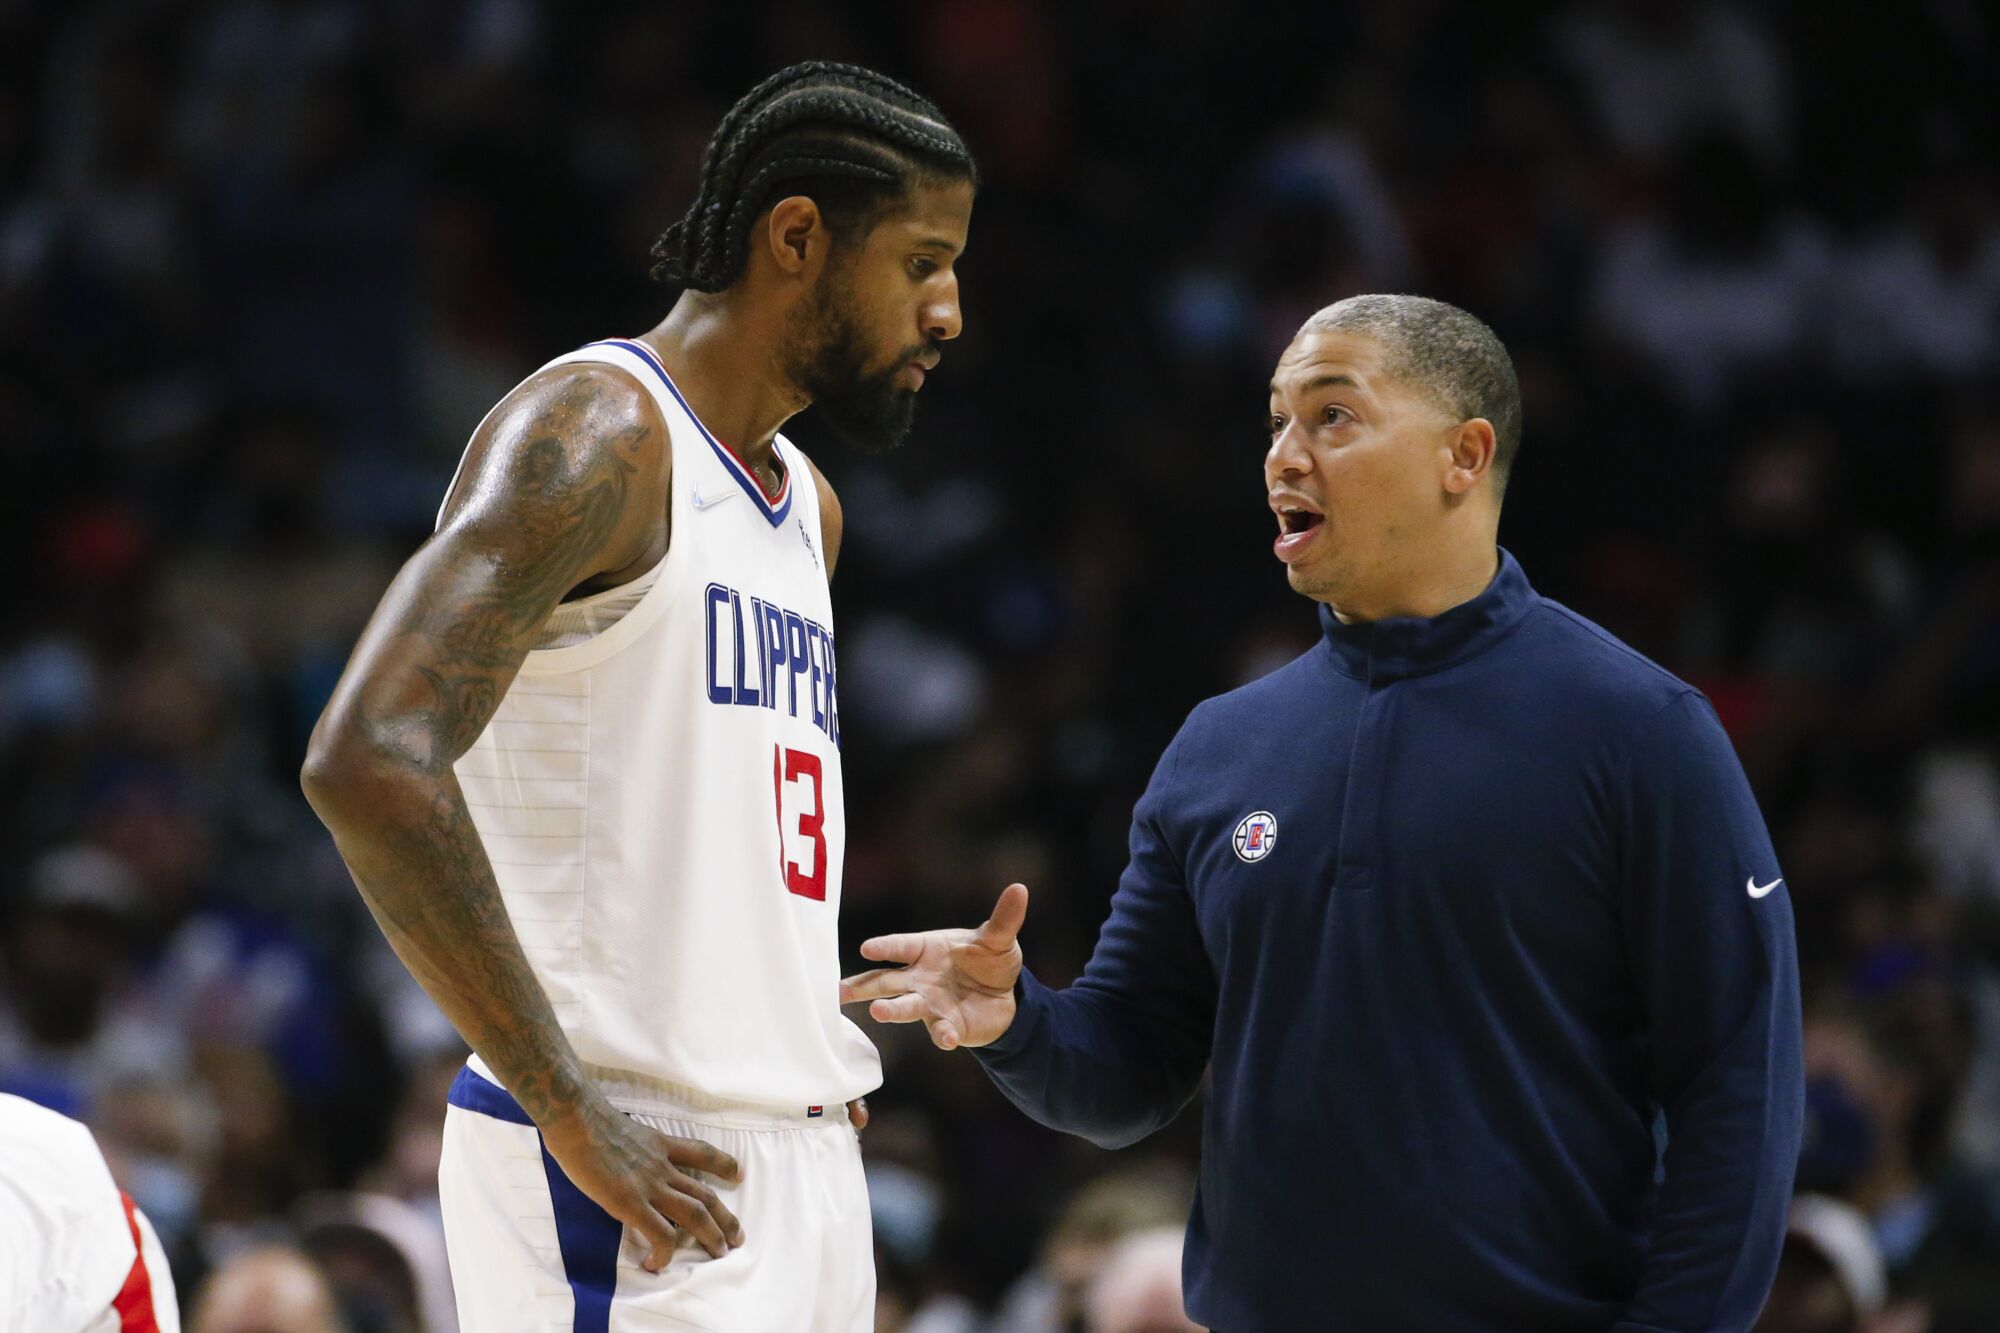 Clippers coach Tyronn Lue talks to forward Paul George during a game against the Charlotte Hornets on Nov. 7.